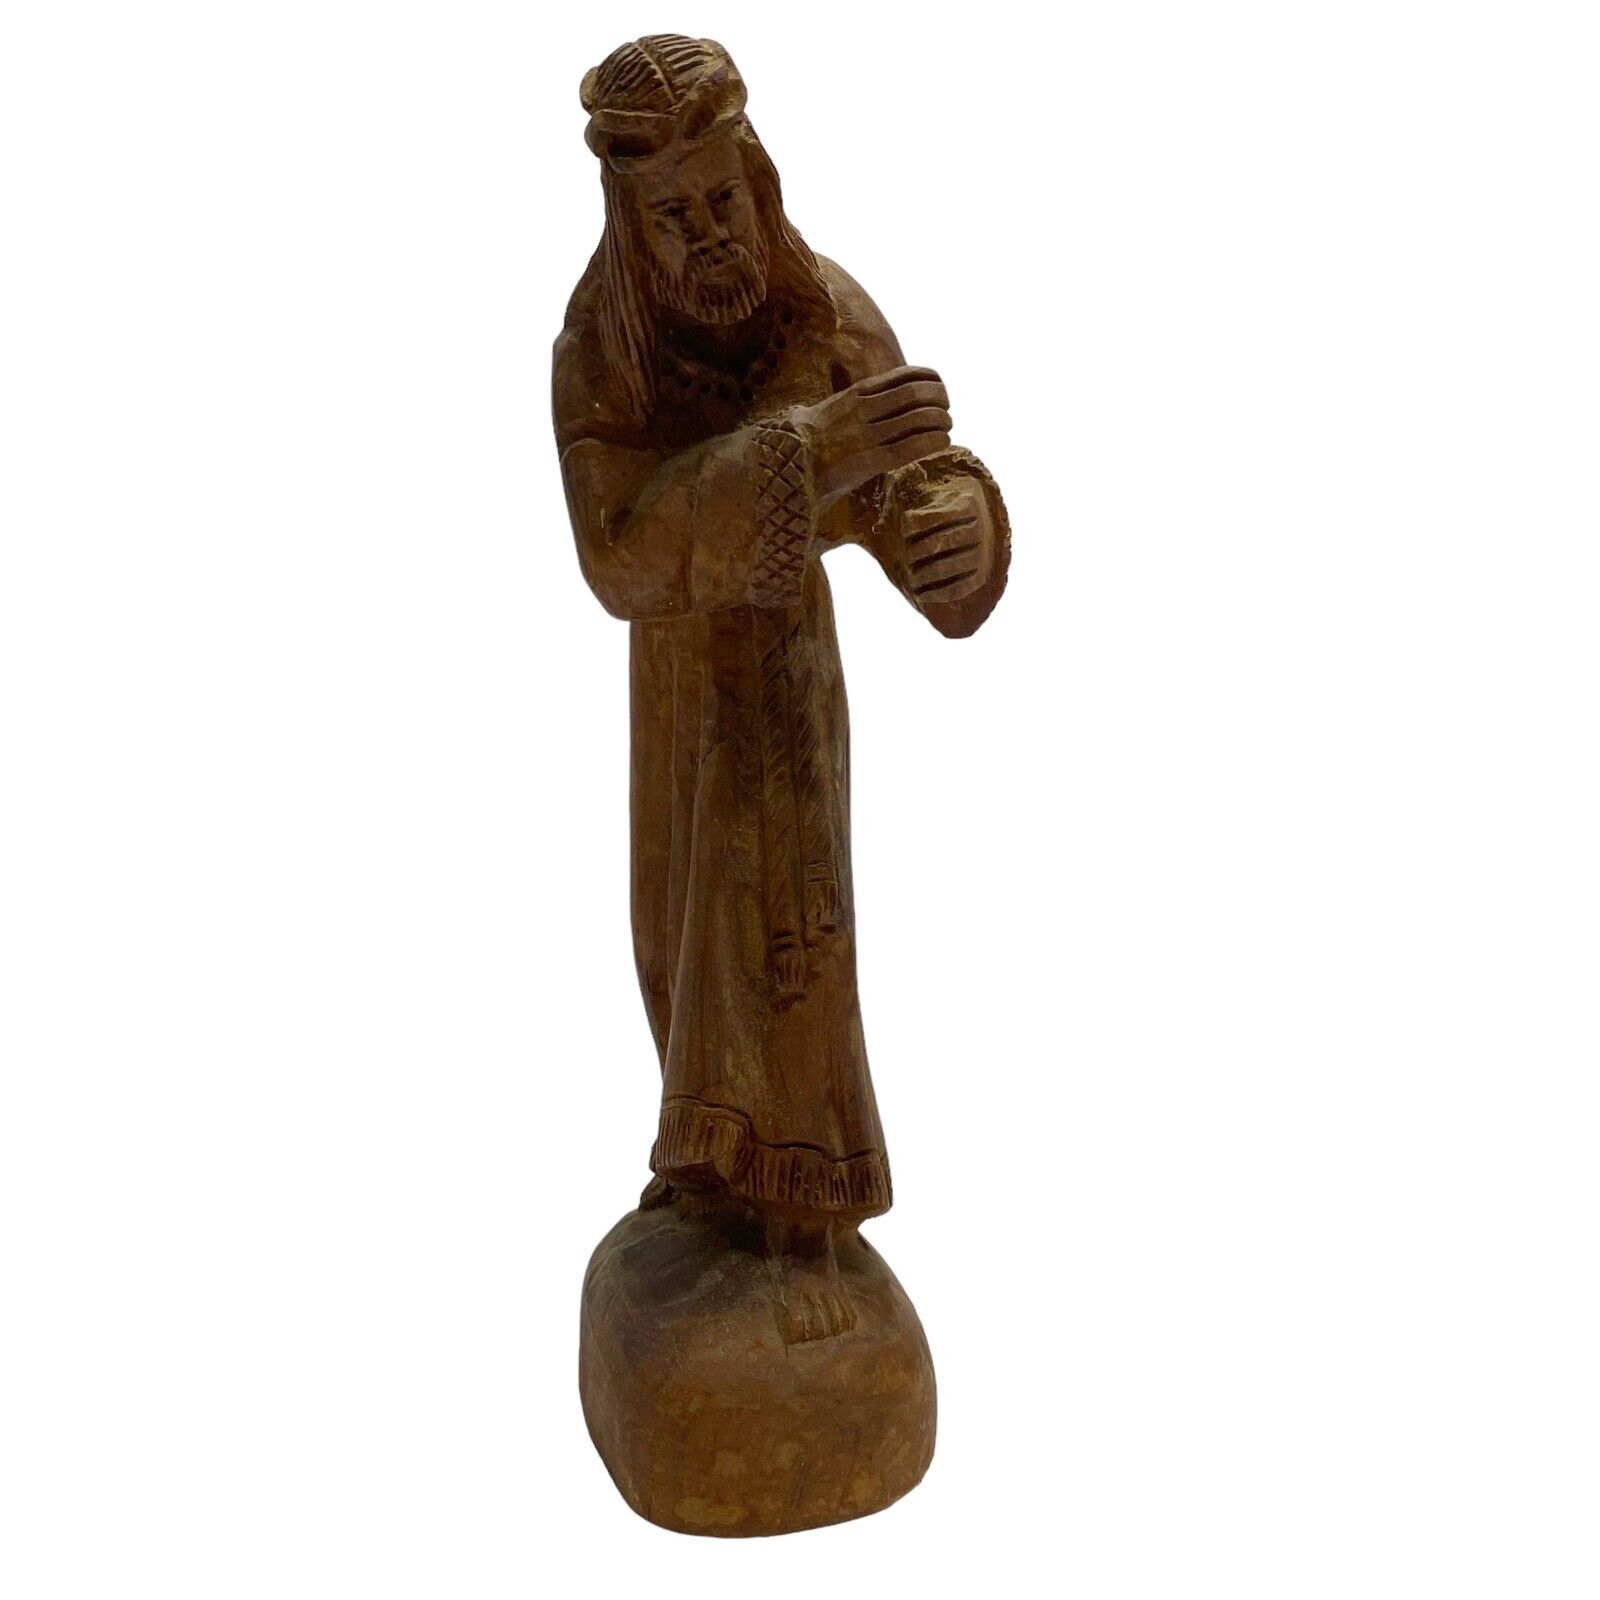 Vintage Wood Carved Jesus Walking Crucible Statue 8.75” Tall Carving Decorative